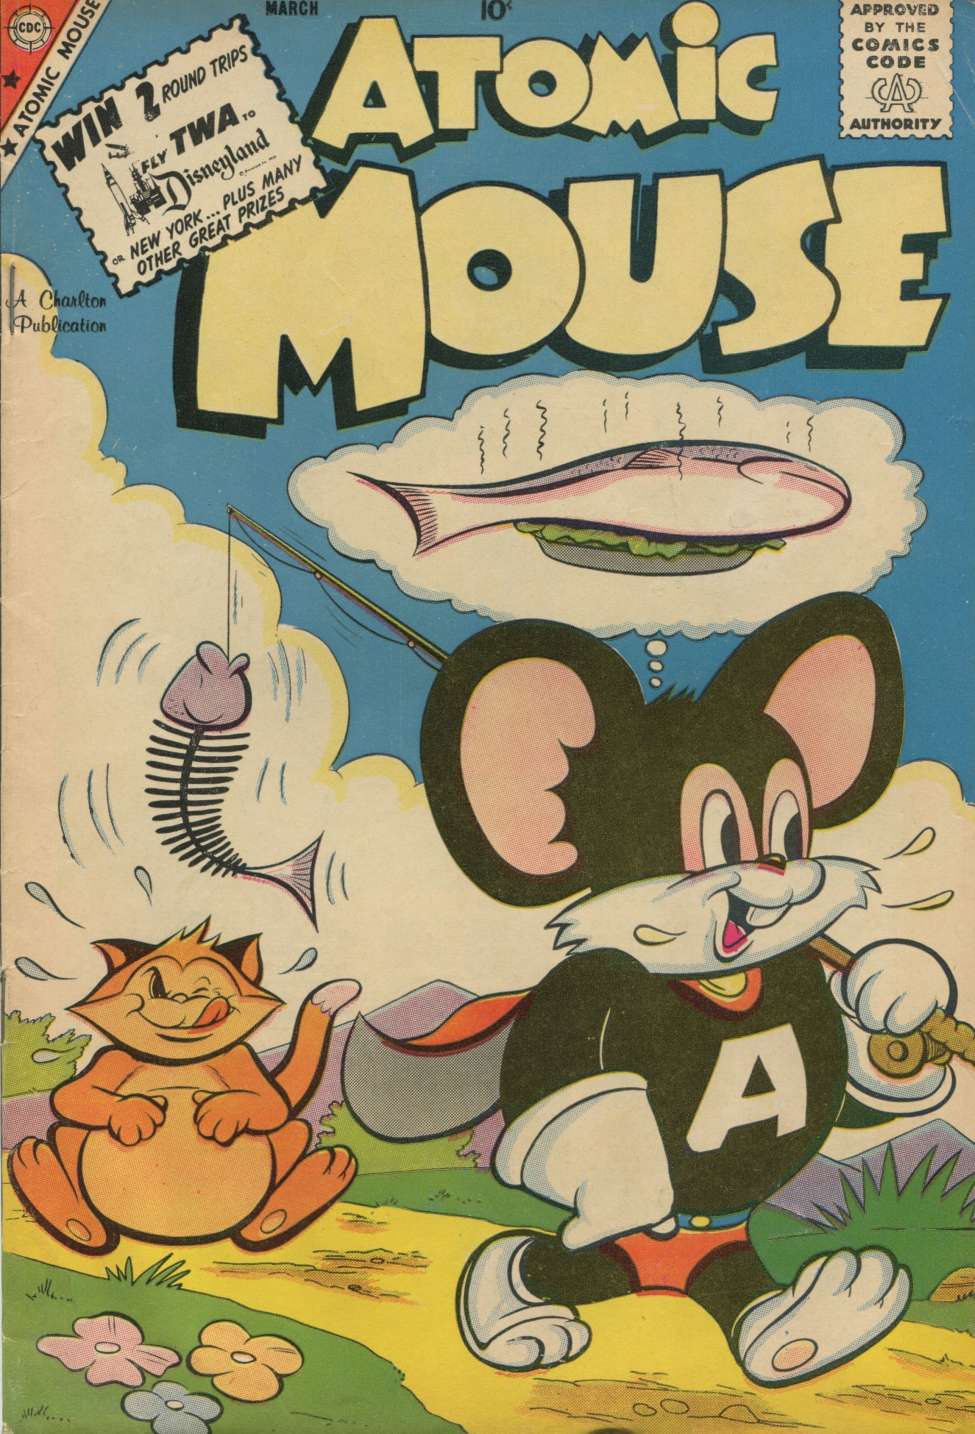 Book Cover For Atomic Mouse 35